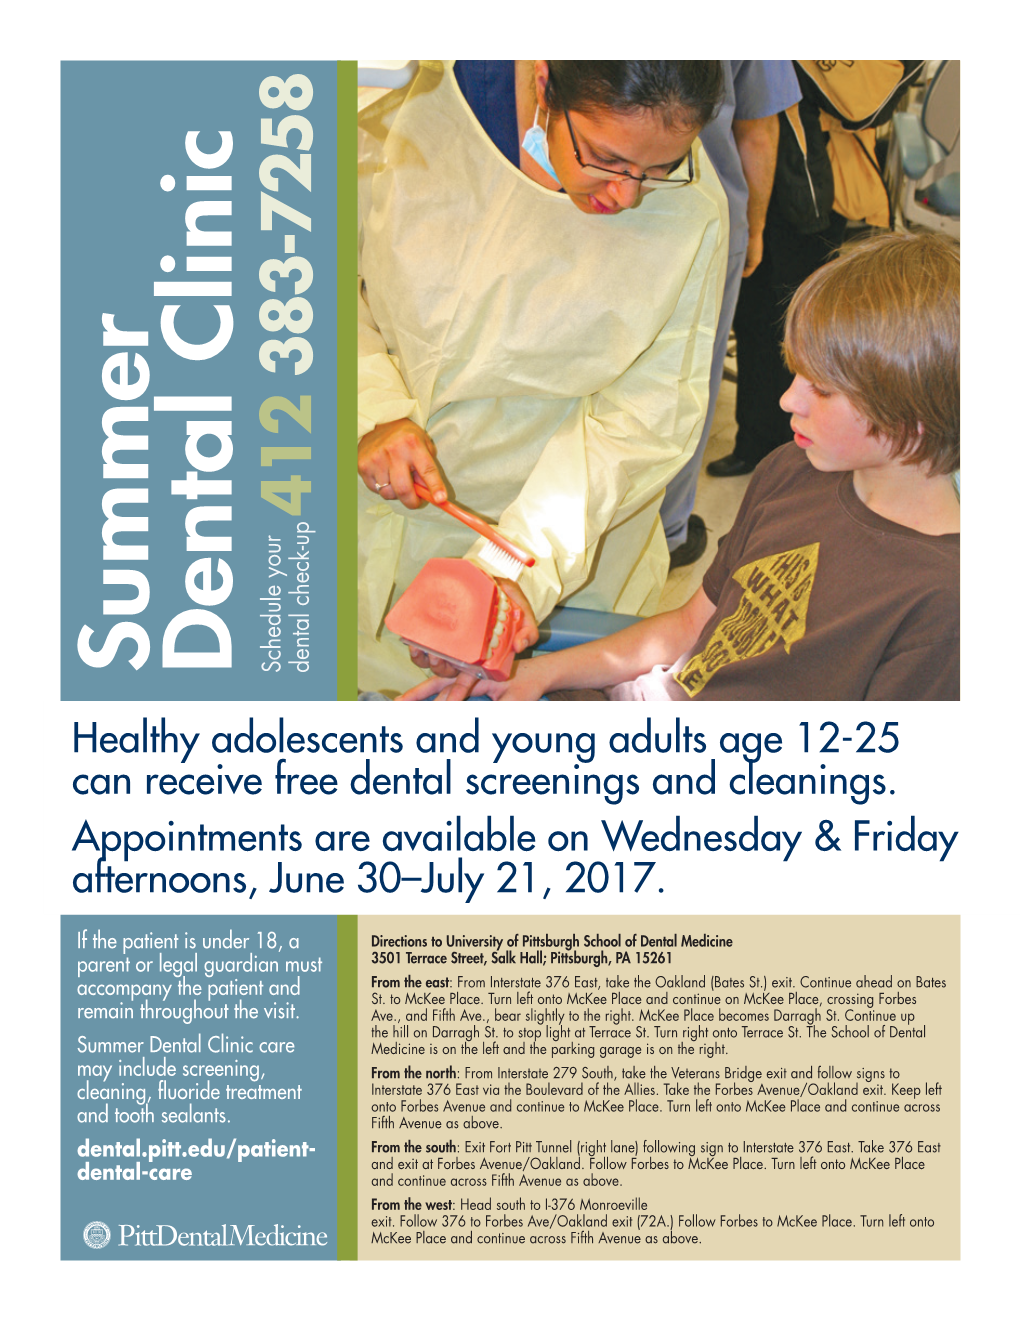 Healthy Adolescents and Young Adults Age 12-25 Can Receive Free Dental